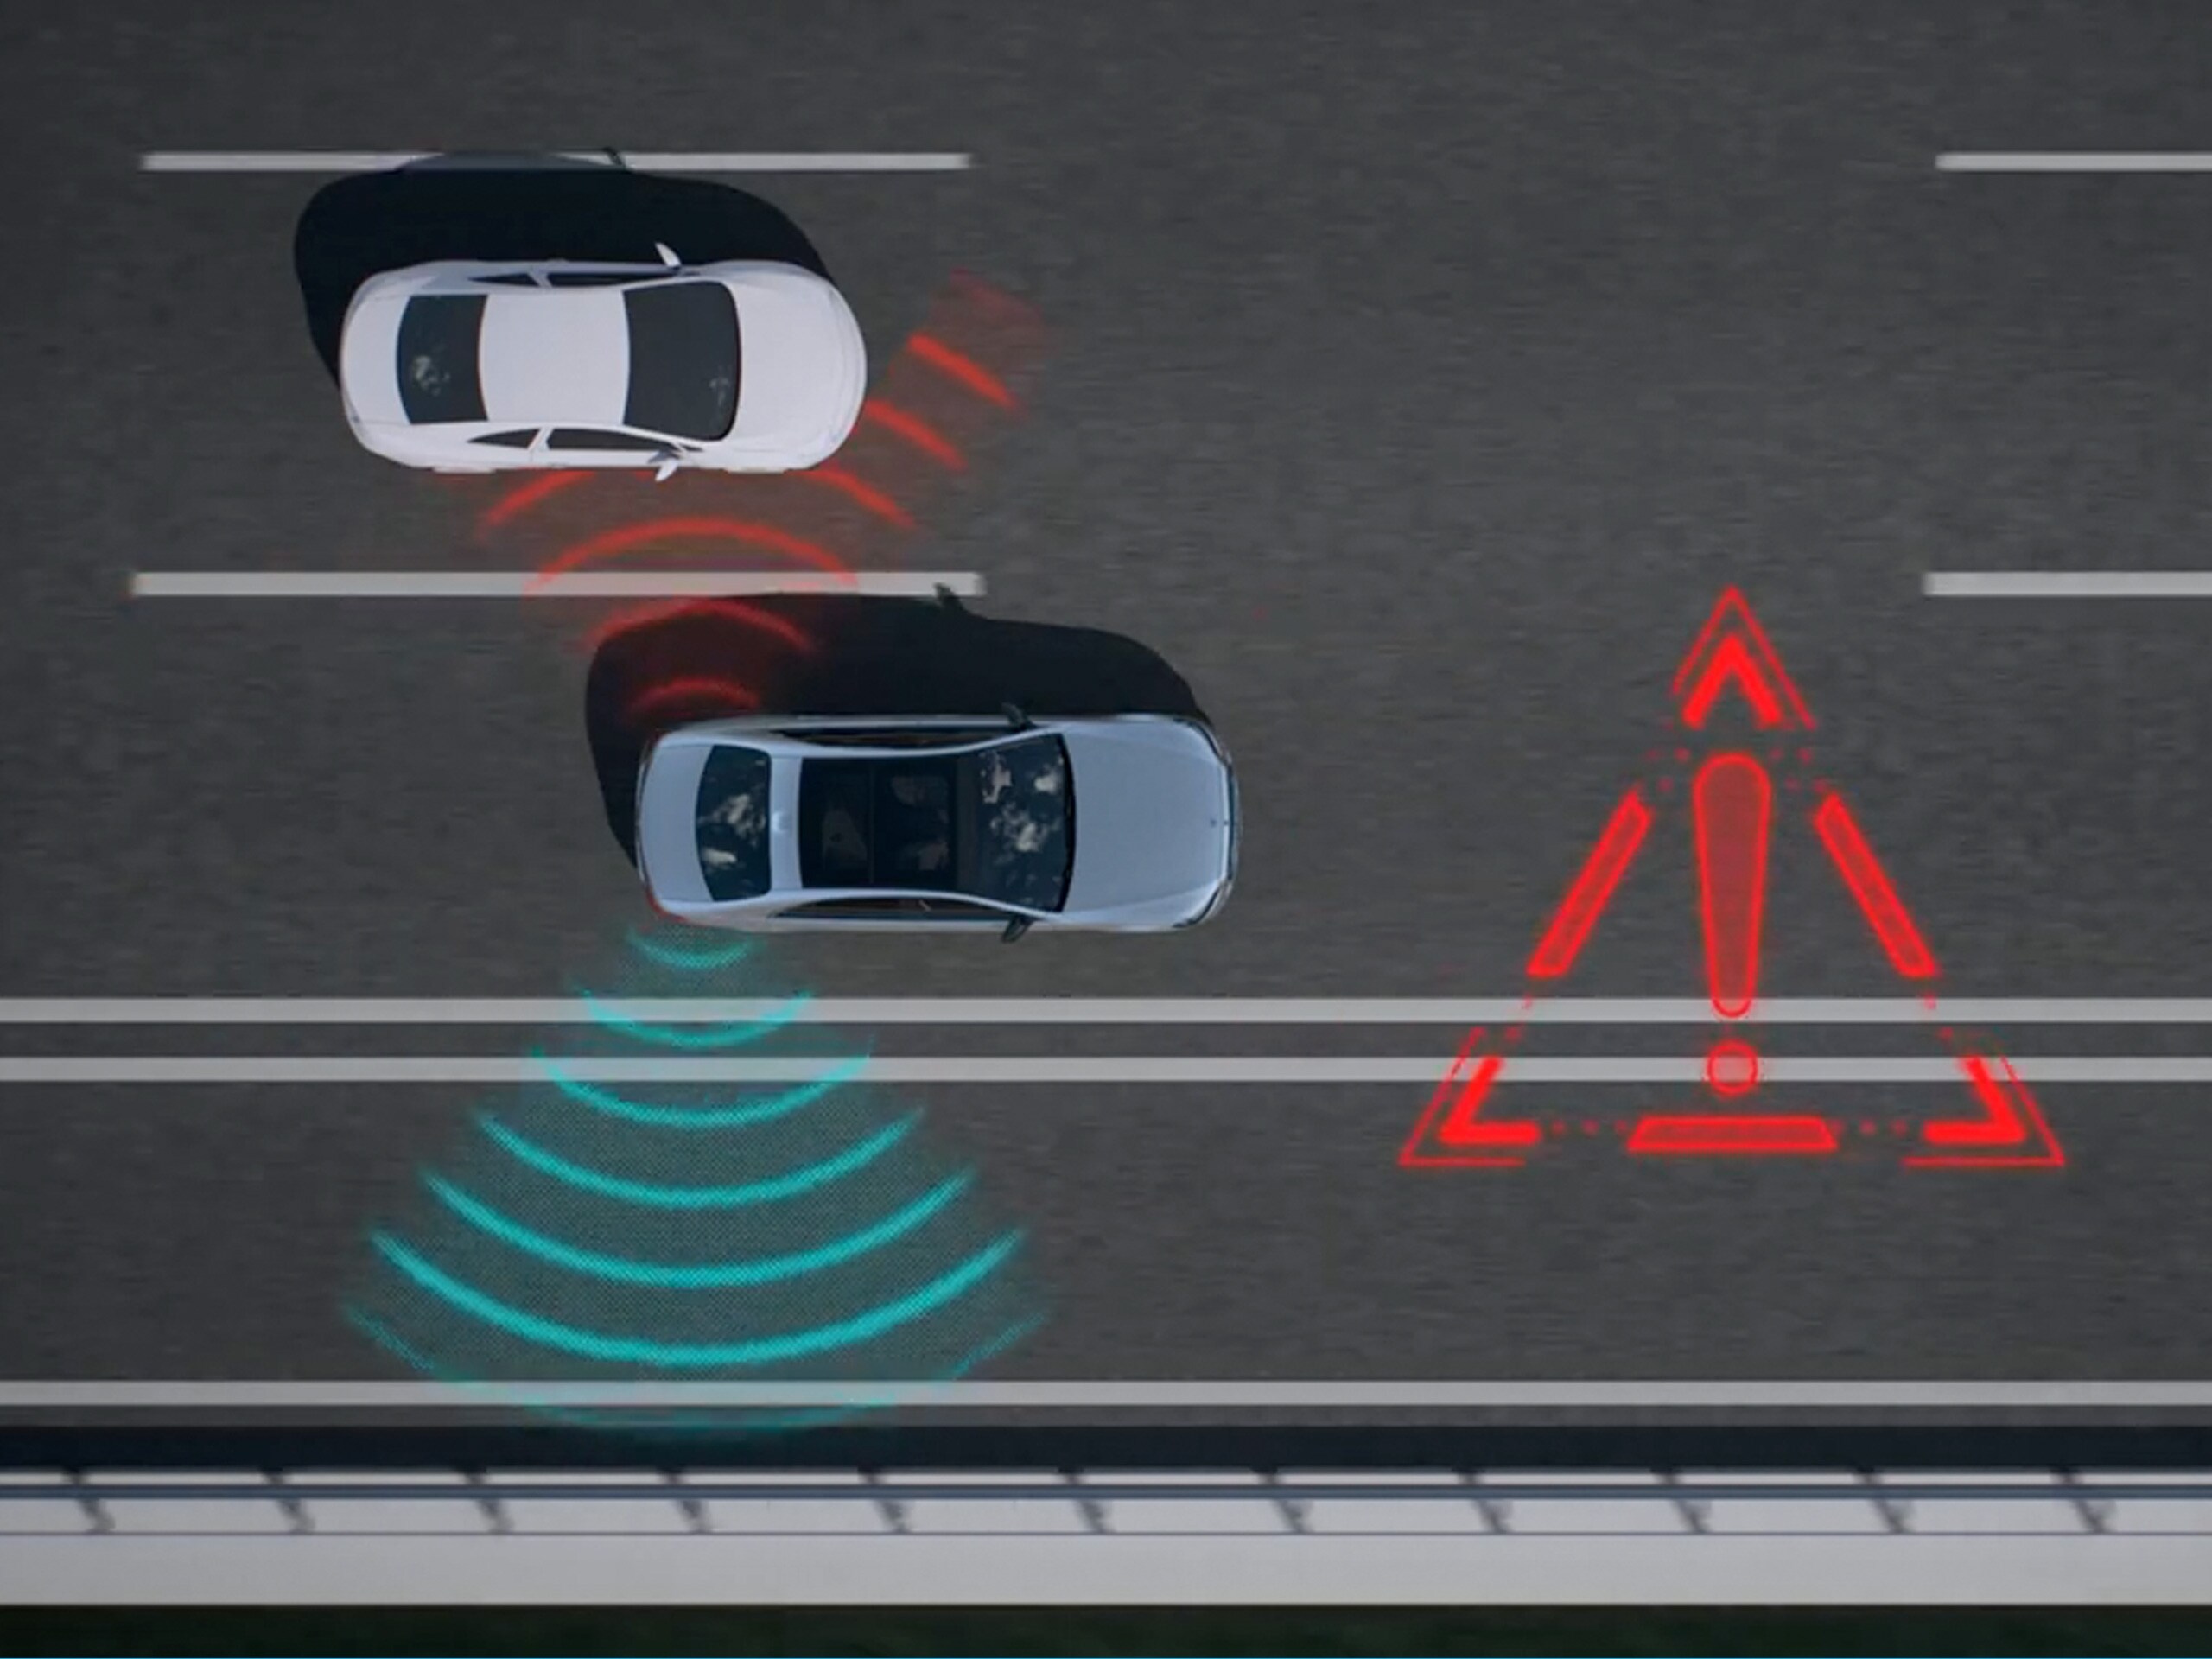 The video illustrates the functions of Active Blind Spot Assist in the Mercedes-Maybach S-Class.